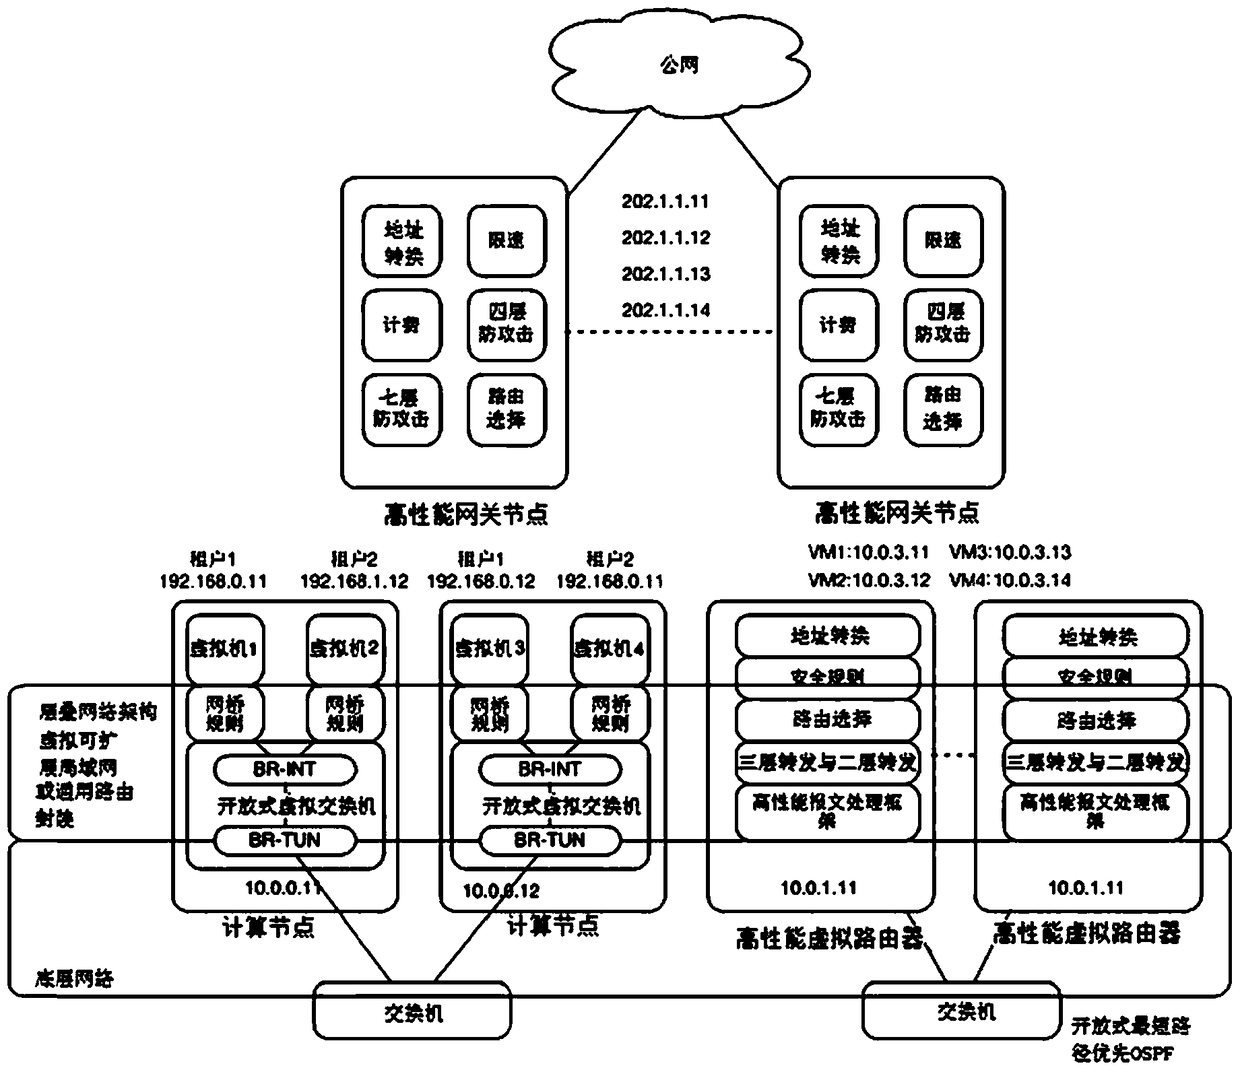 A multi-tenant-oriented cloud network system